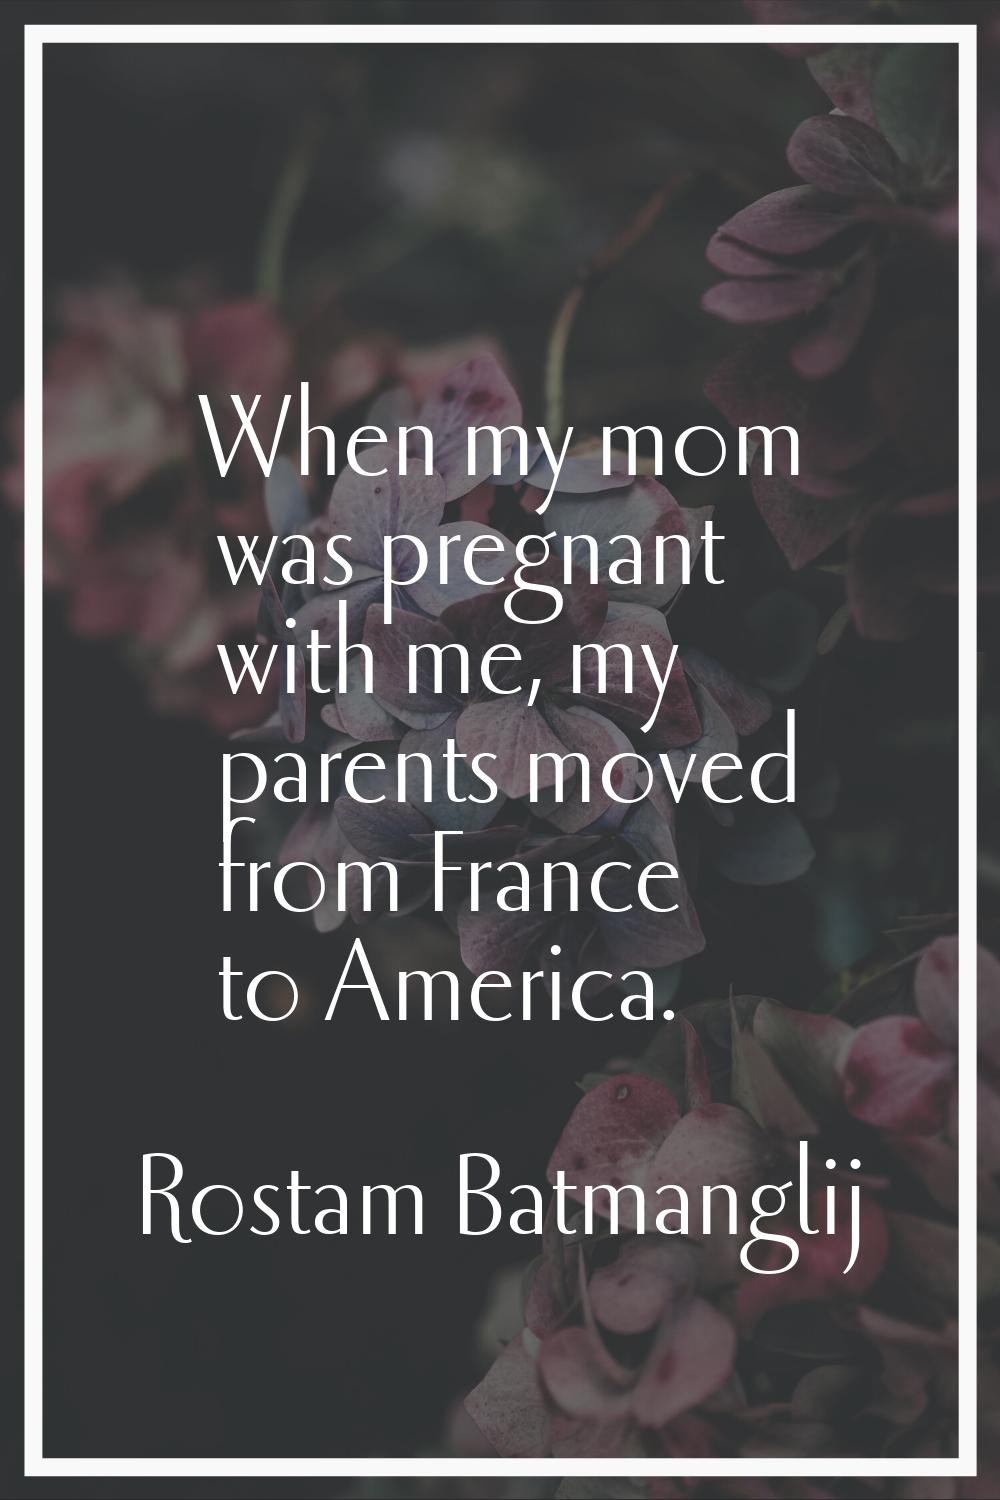 When my mom was pregnant with me, my parents moved from France to America.